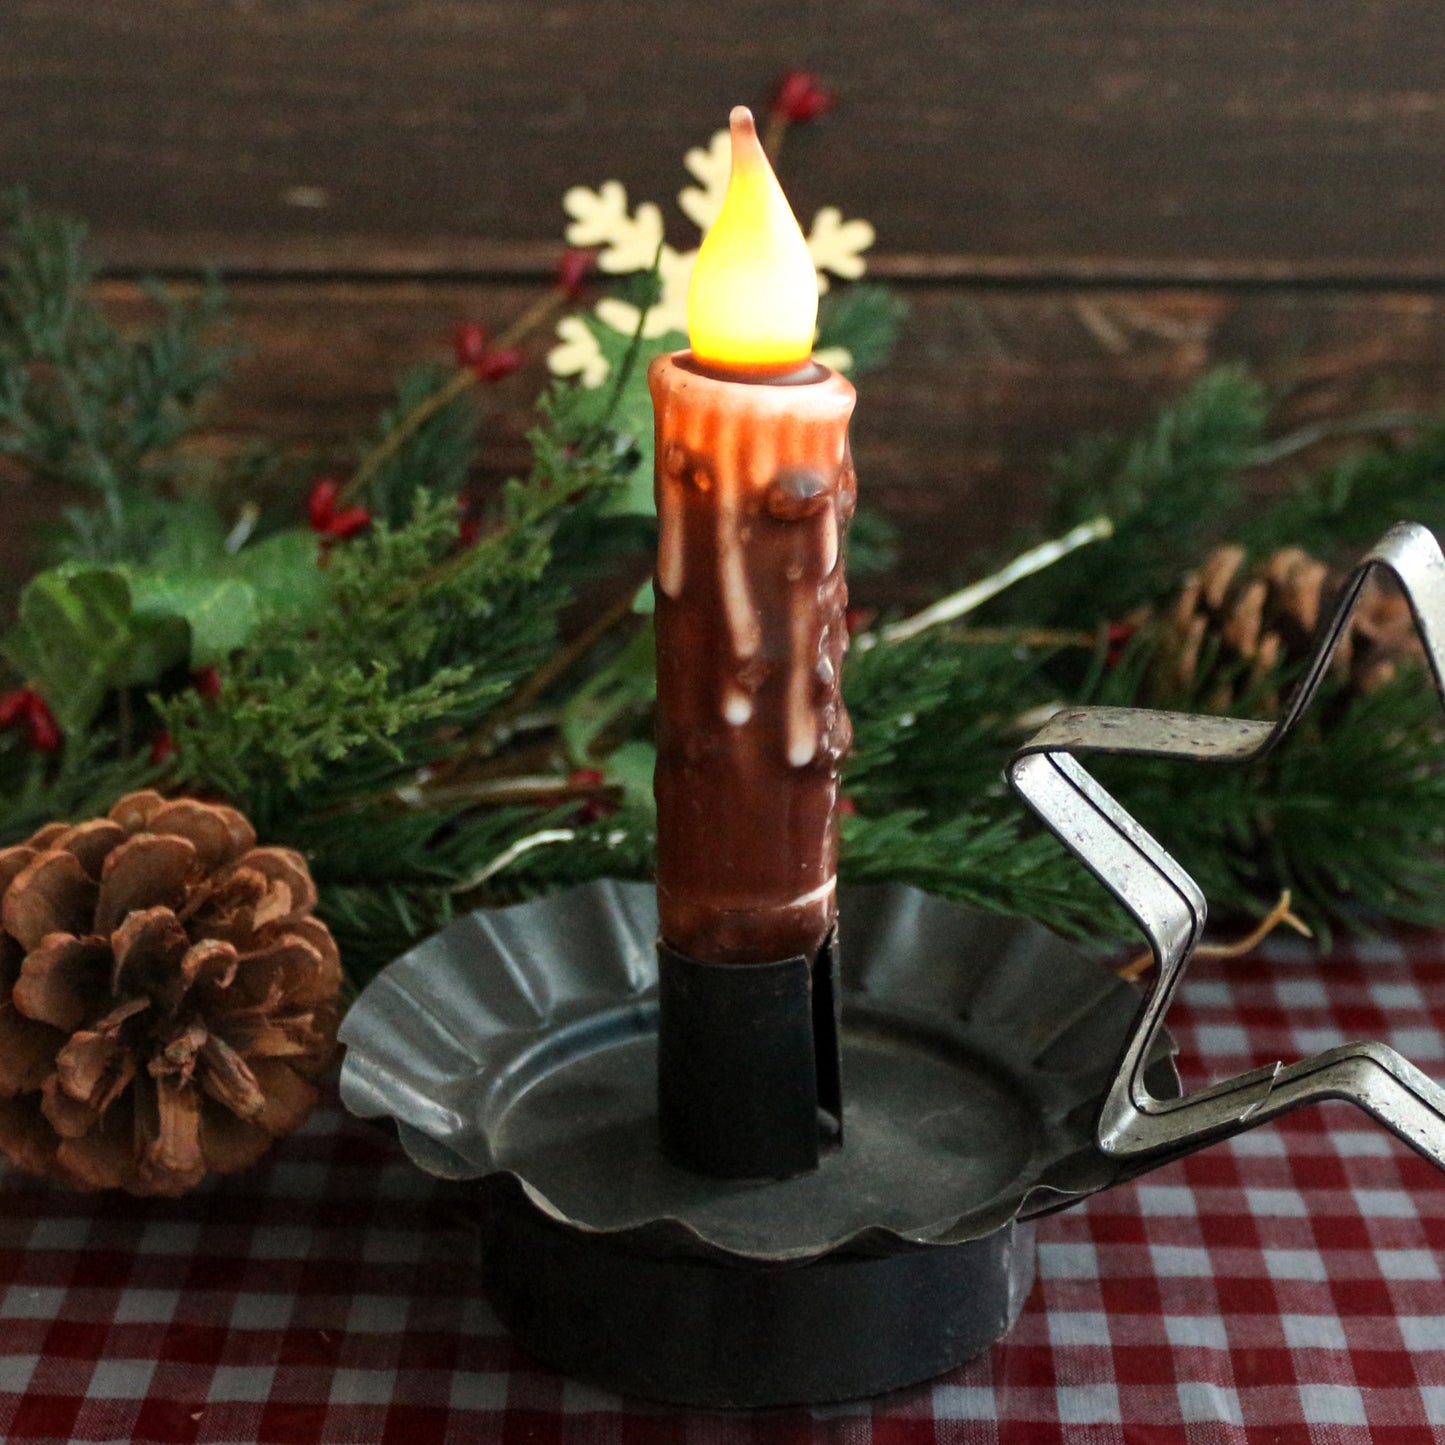 CVHOMEDECO. Real Wax Hand Dipped Battery Operated LED Timer Taper Candles Rustic Primitive Flameless Lights Décor, 4.75 Inch, Coffee, 6 PCS in a Package